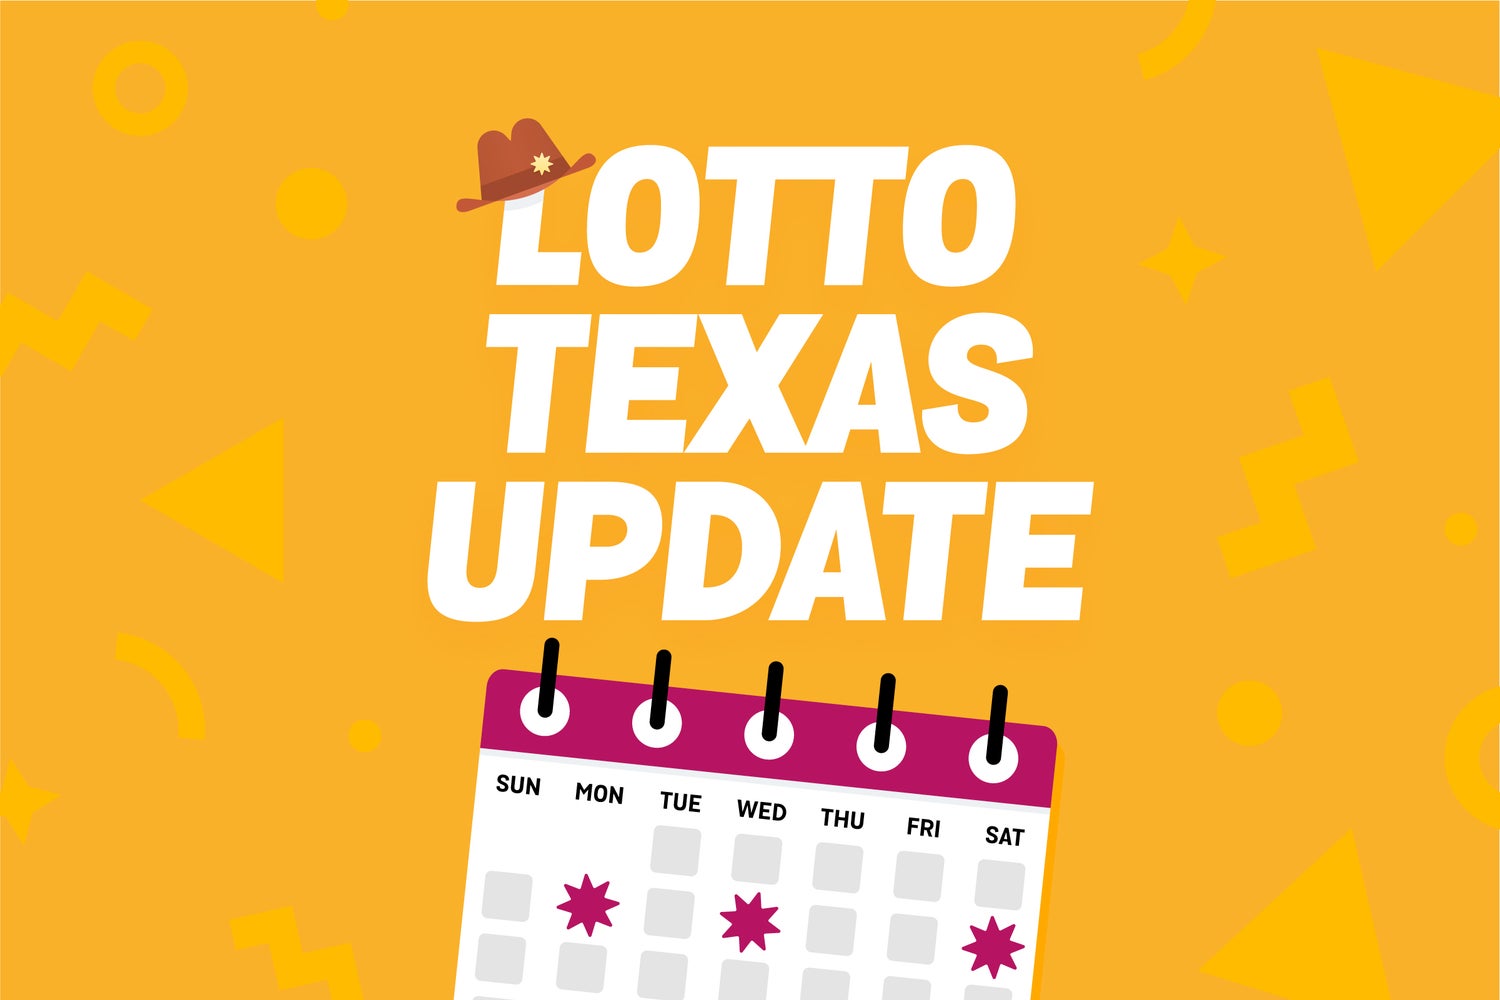 Lotto Texas now draws 3 times a week